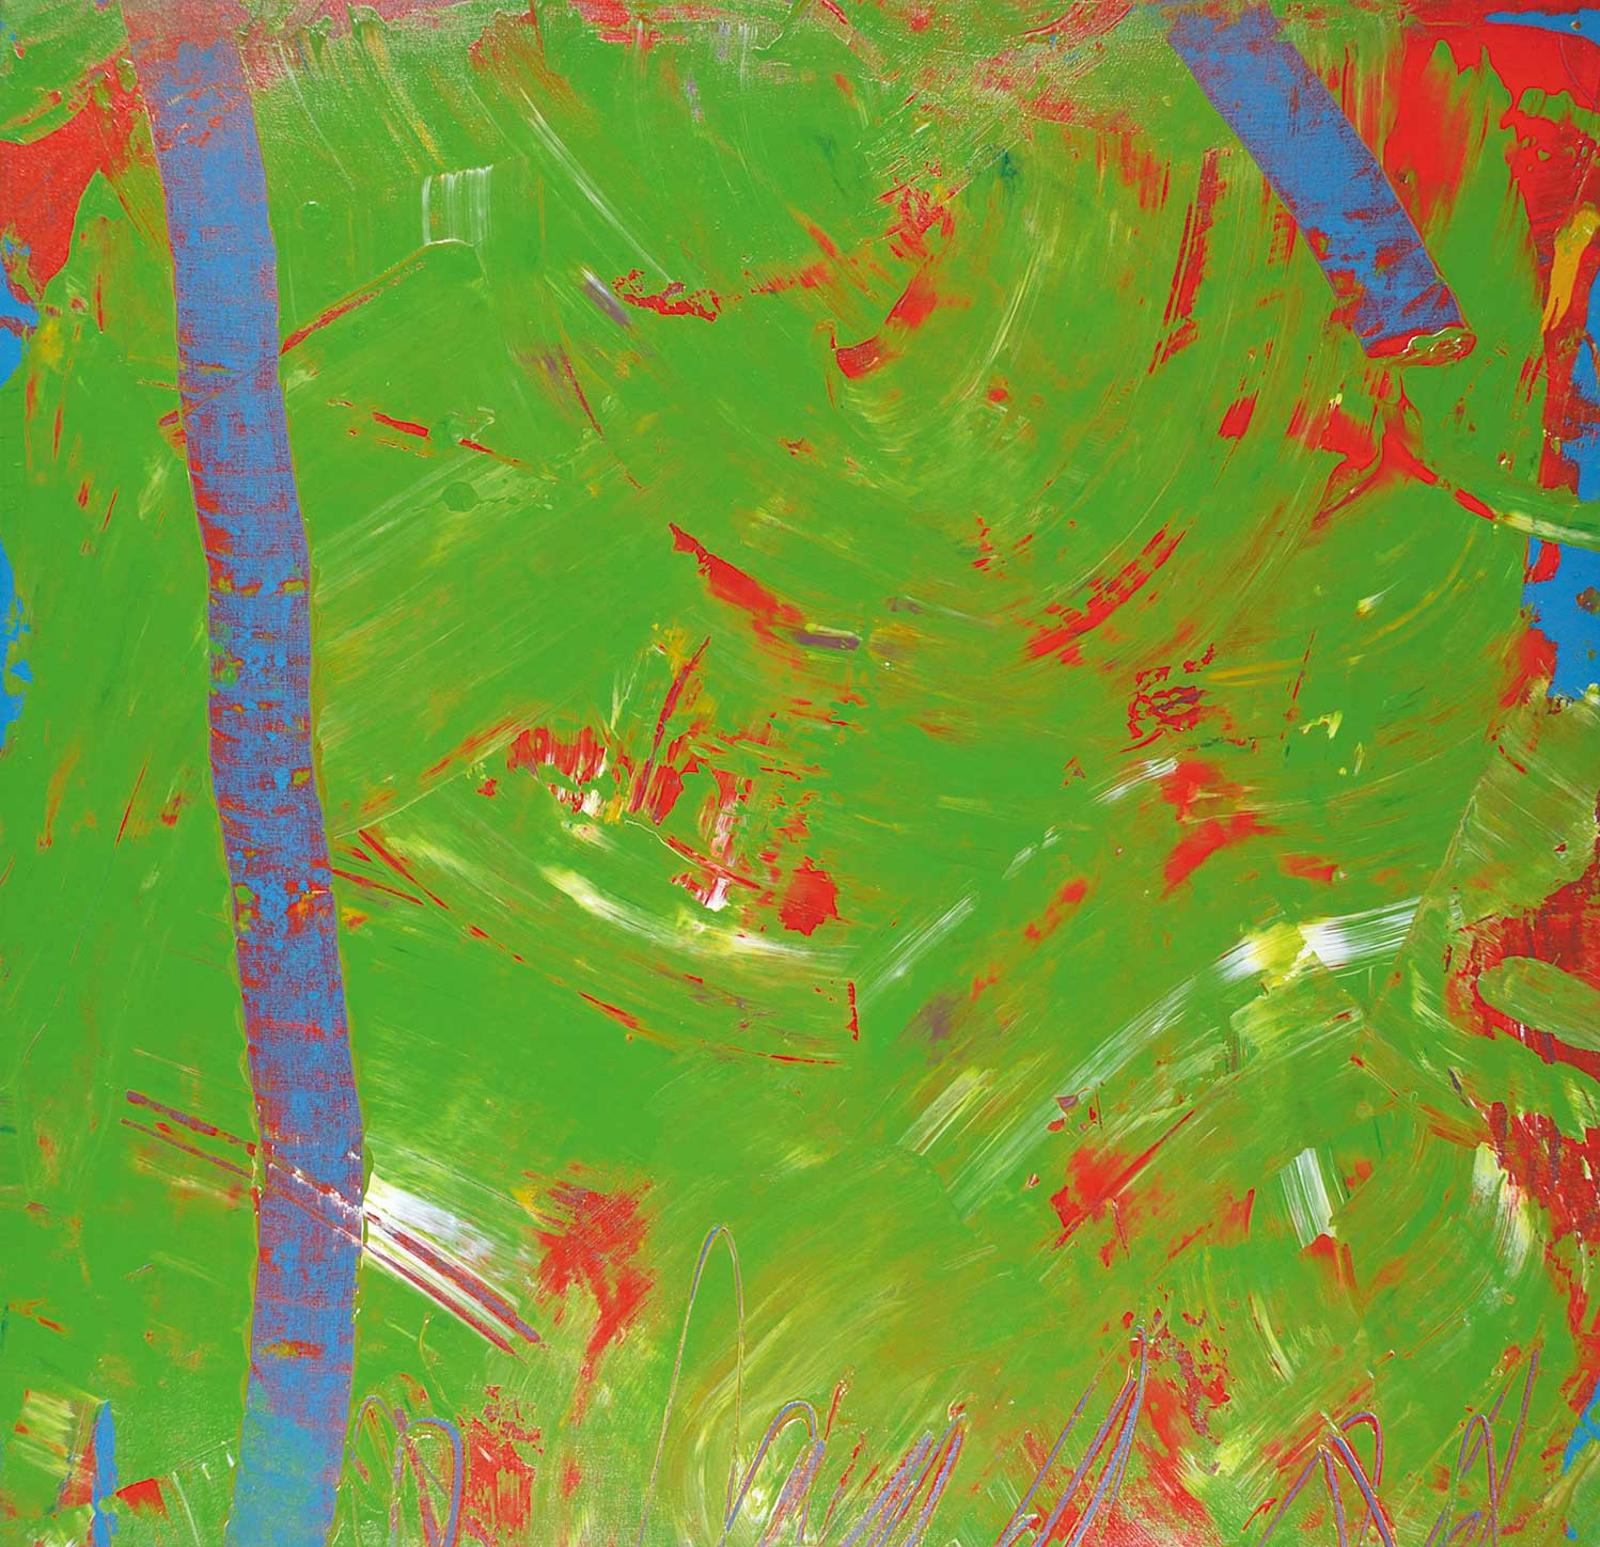 Peter G. MacKendrick (1953-2012) - Untitled - Green and Red Abstract